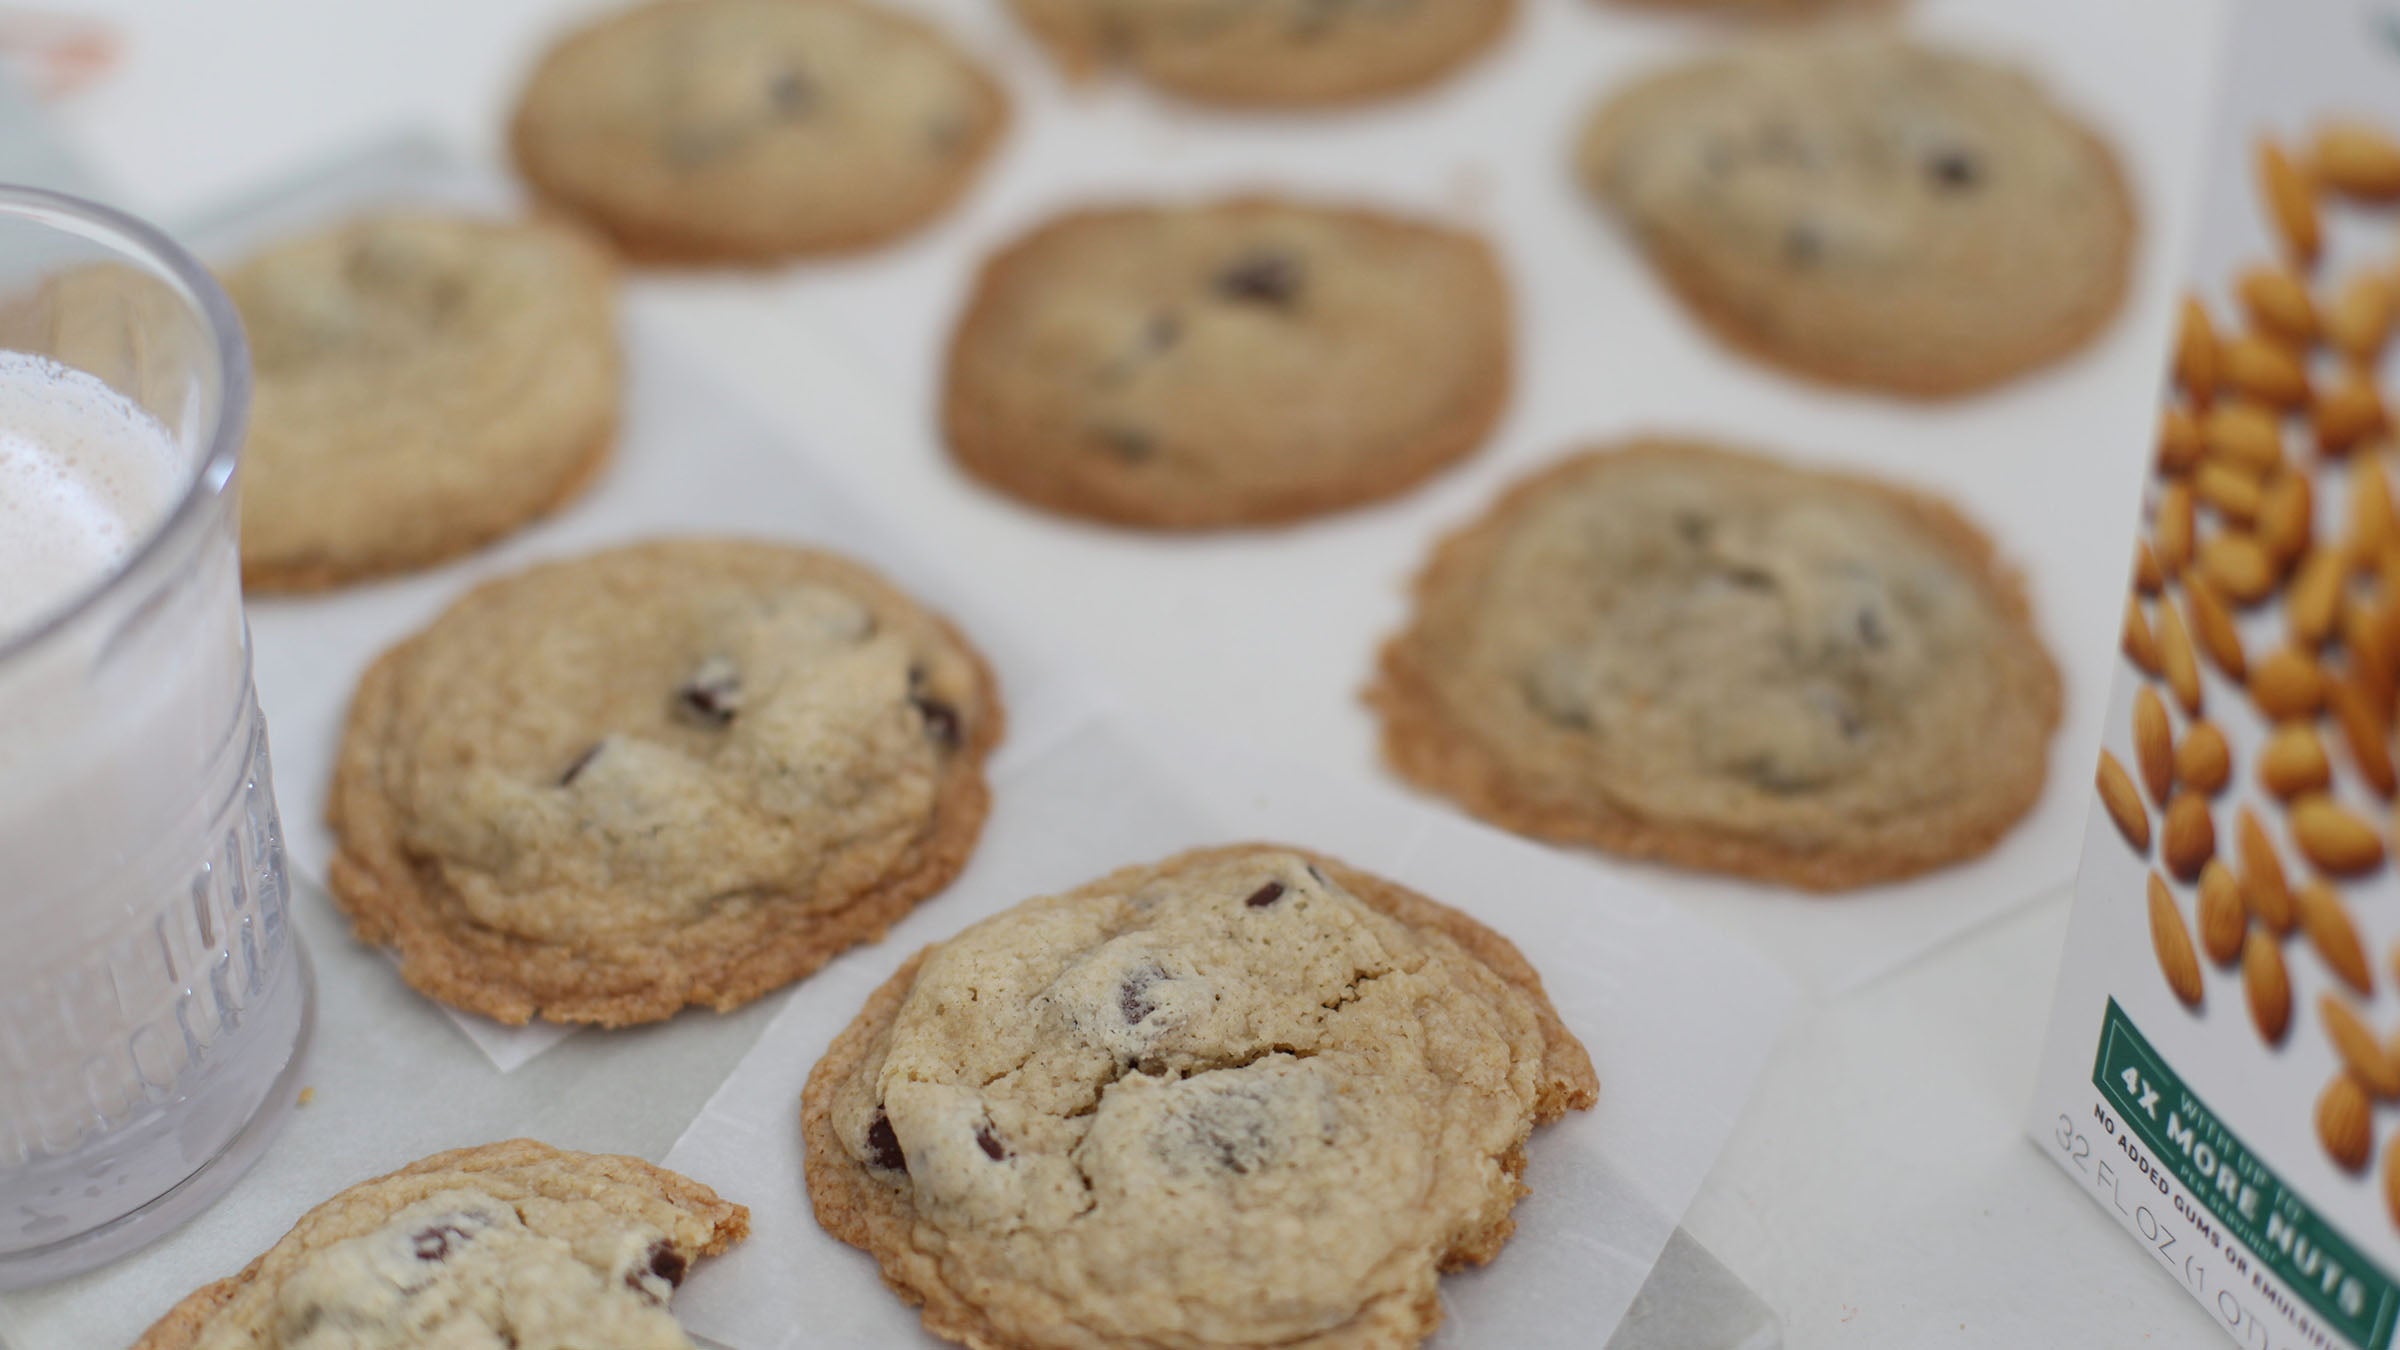 vegan and dairy-free chocolate chip cookies made with almond milk